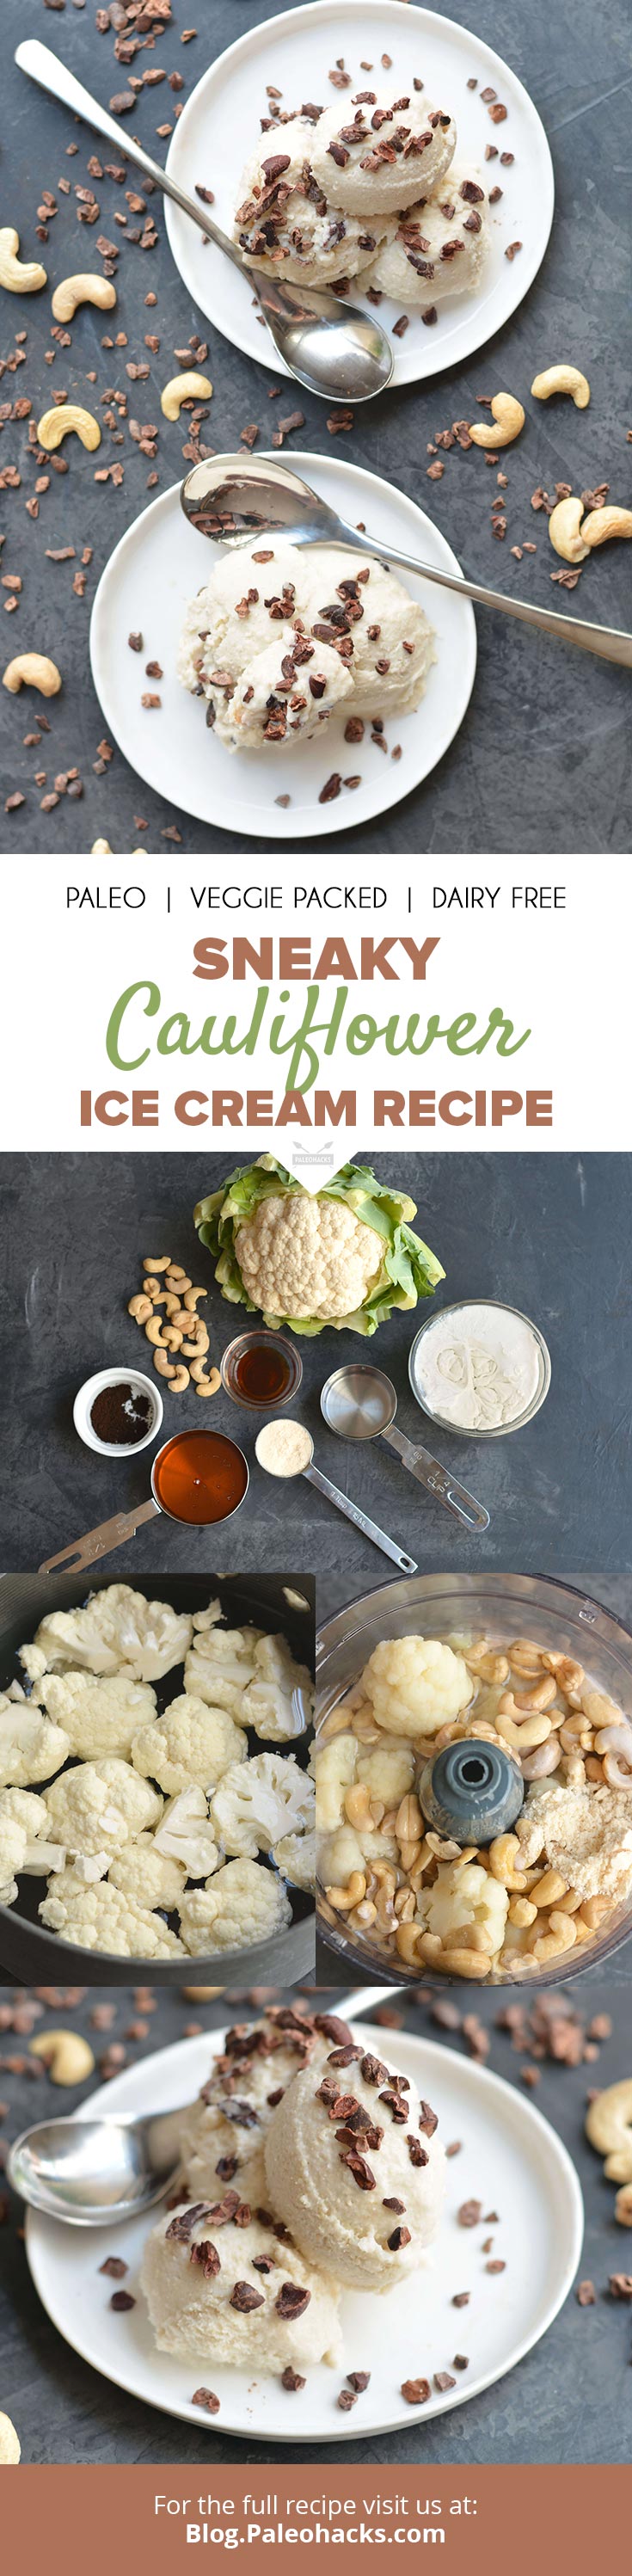 You won’t believe how delicious and easy this homemade ice cream recipe is! This sneaky cauliflower ice cream only takes 10 minutes of prep time.